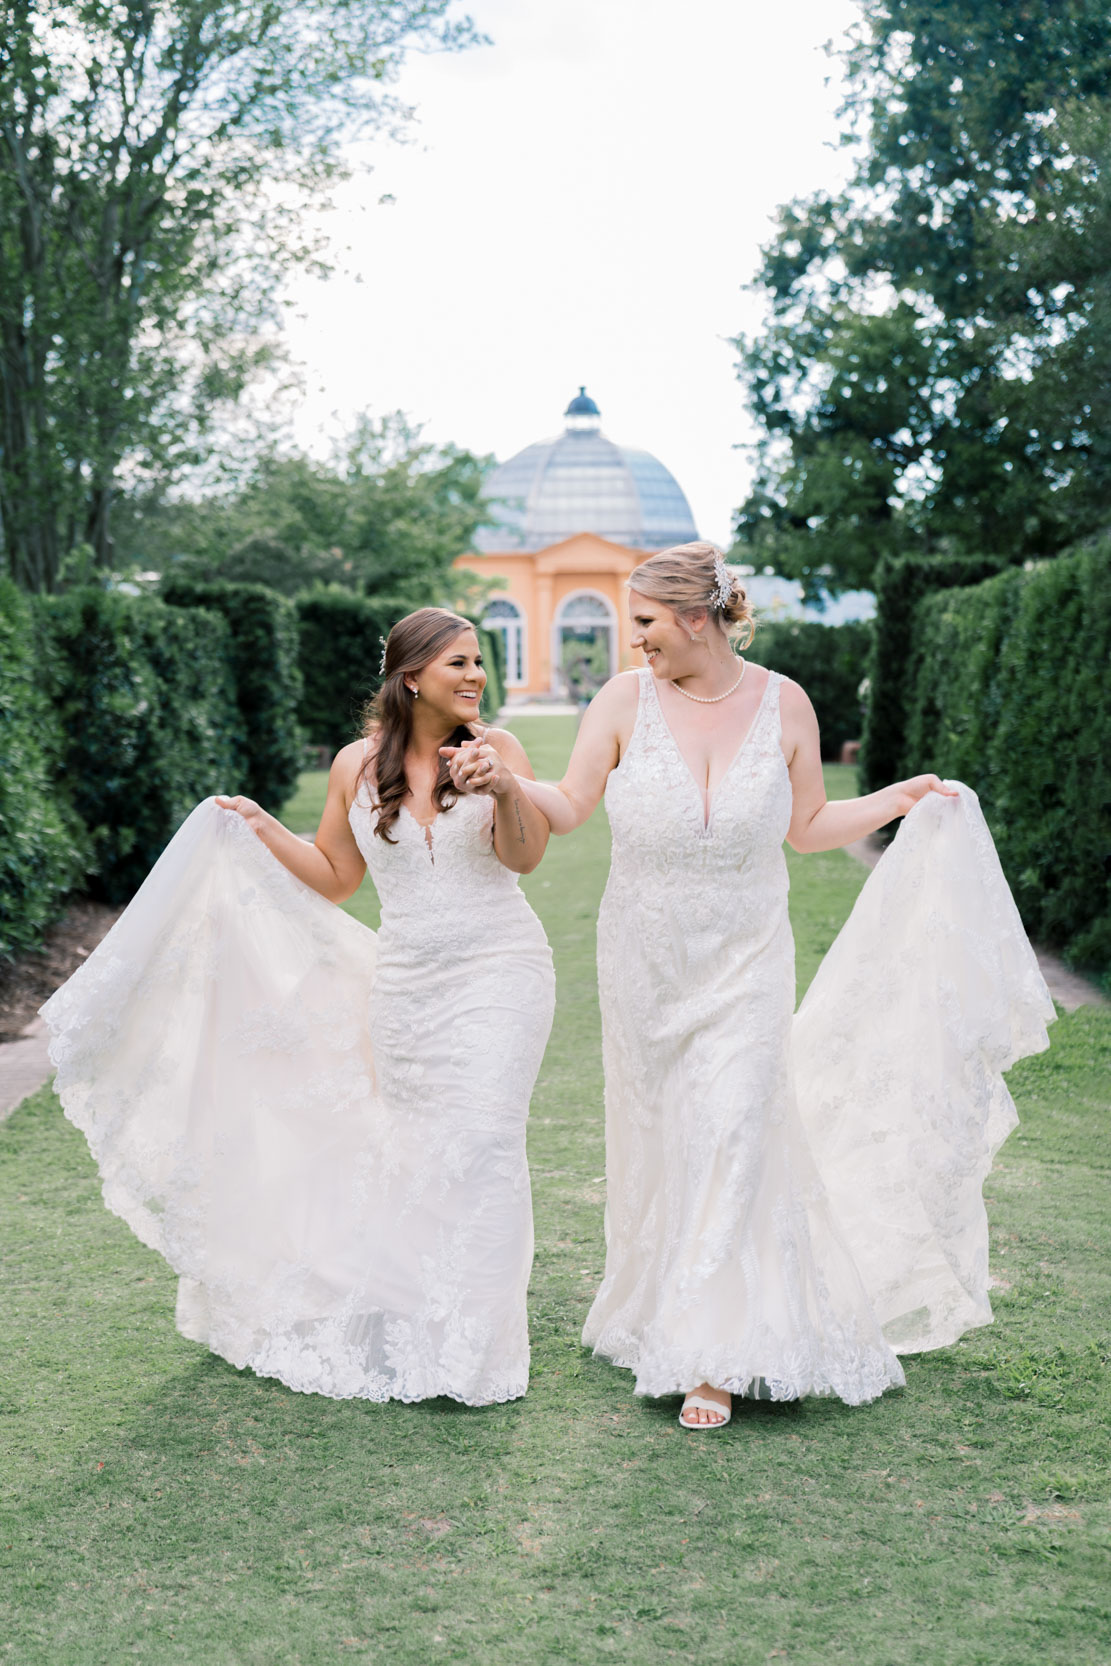 Brides smiling and strolling in City Park Botanical Gardens